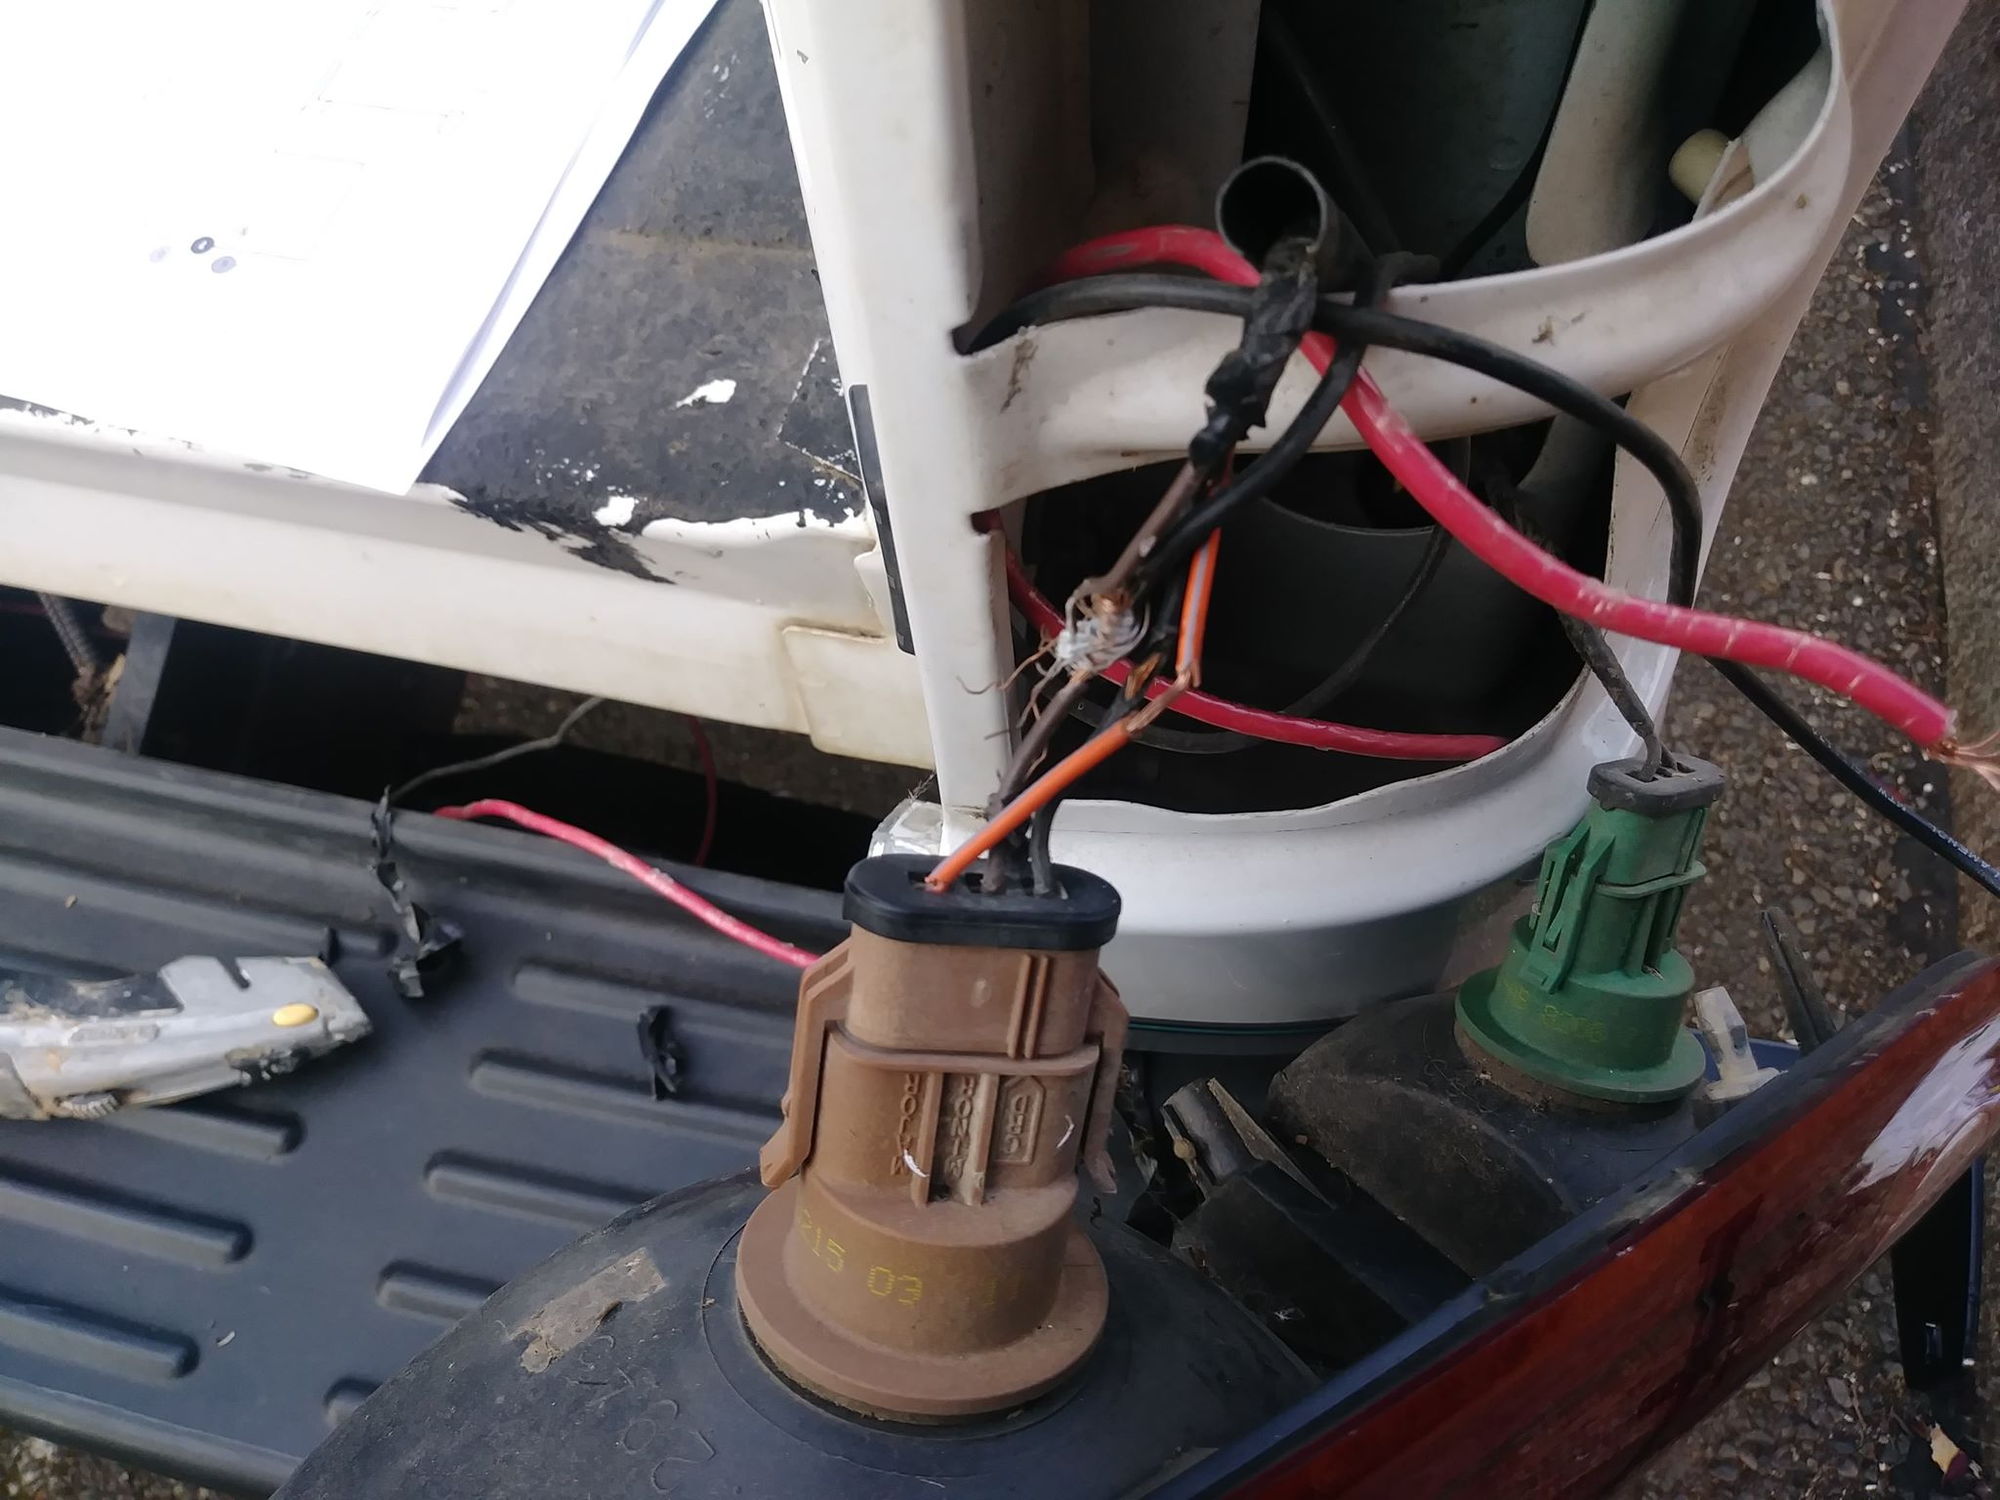 Trailer wiring diagram 99 F250. Need to fix plug for camper - Ford